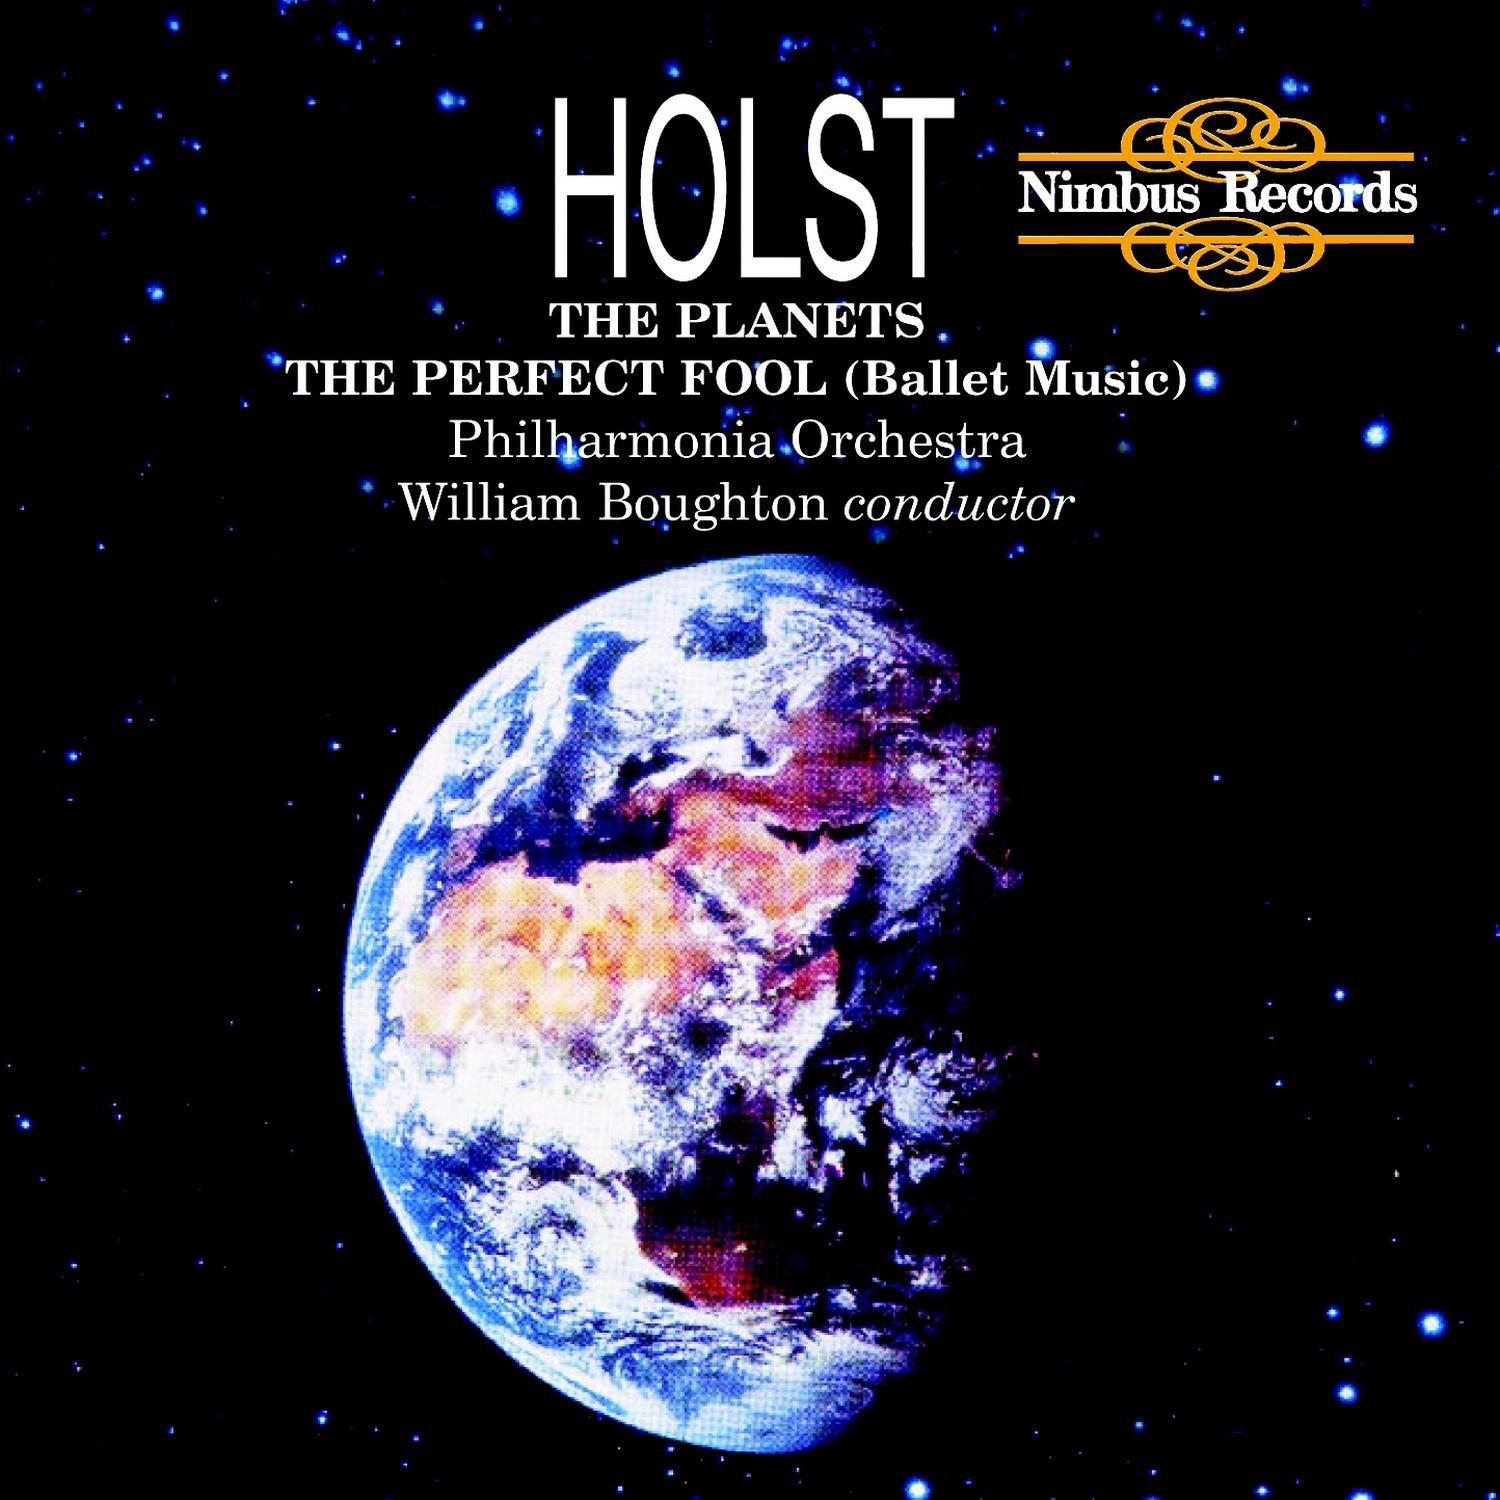 Holst: The Planets & The Perfect Fool (Ballet Music)